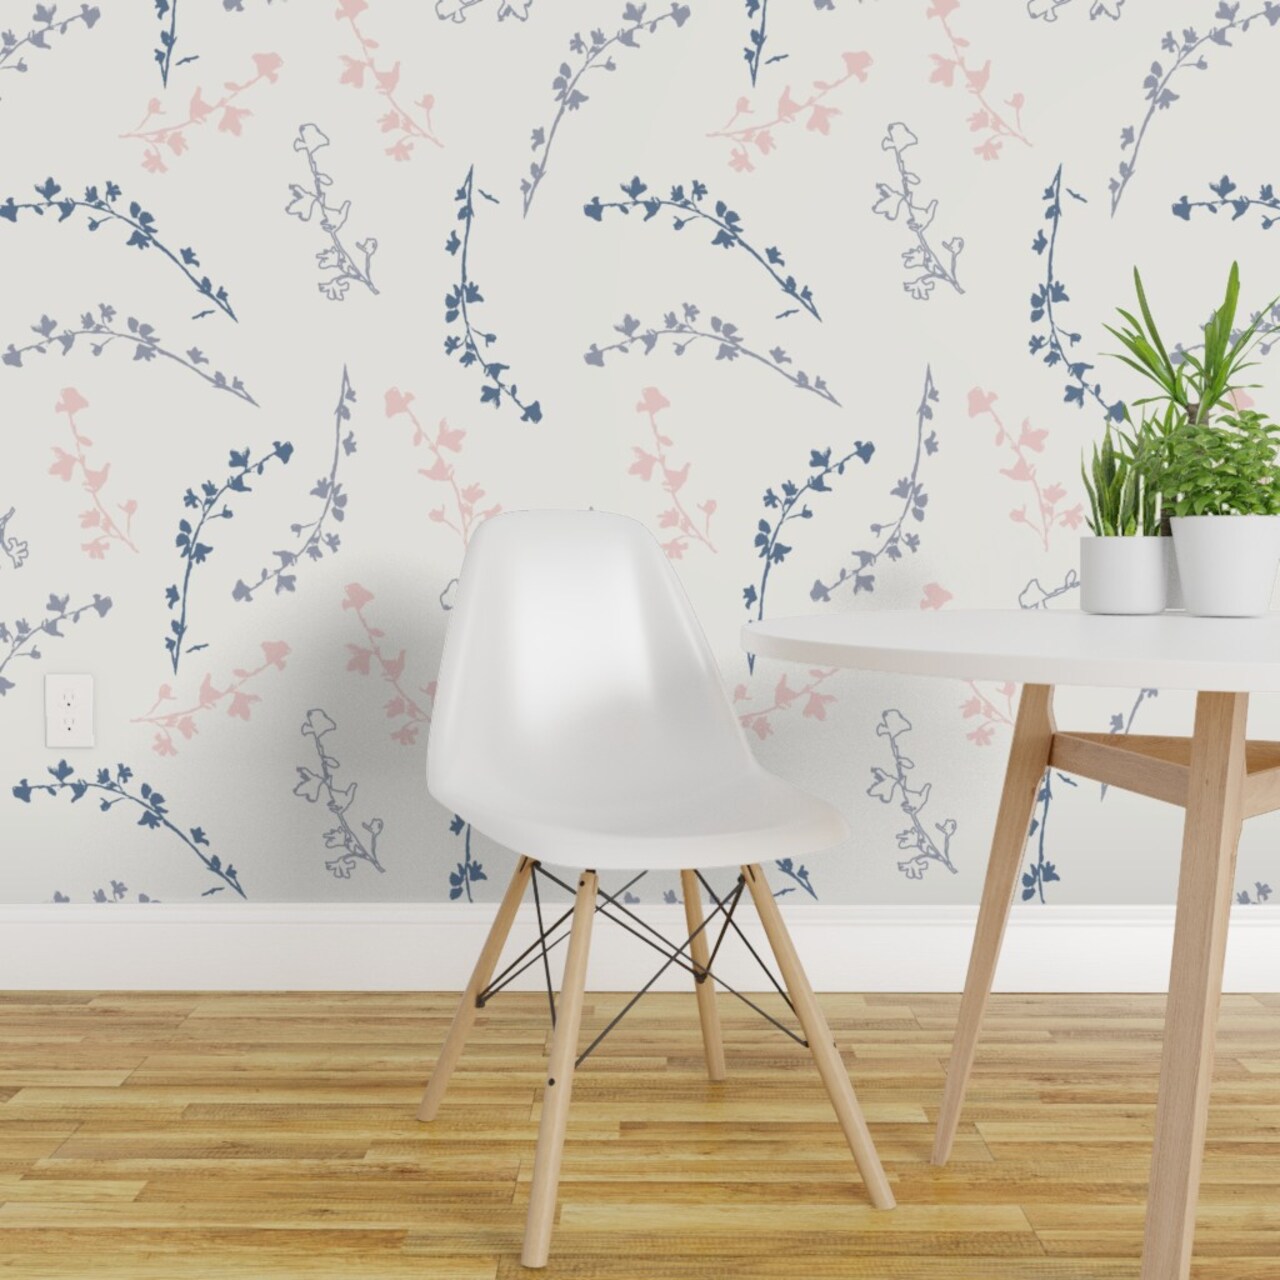 Peel &#x26; Stick Wallpaper 2FT Wide Sketched Botanicals Muted Lilac Blue Pink Ivory Garden Hand Drawn Custom Removable Wallpaper by Spoonflower